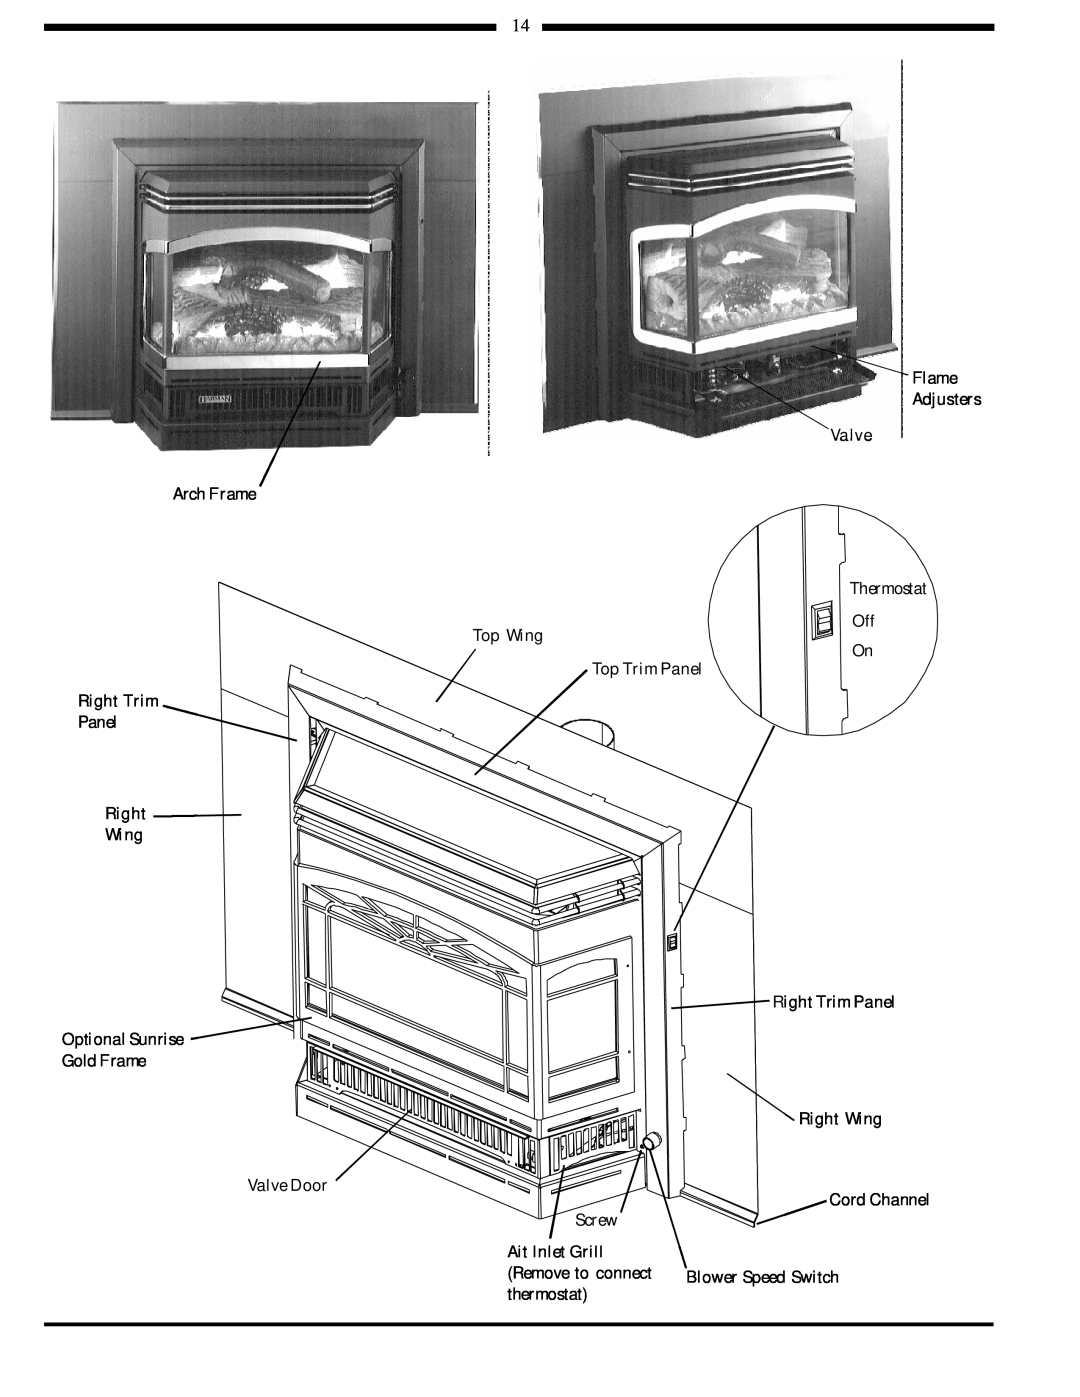 Harman Stove Company 828i manual Arch Frame Top Wing Top Trim Panel Right Trim, Panel Right Wing, Ait Inlet Grill 